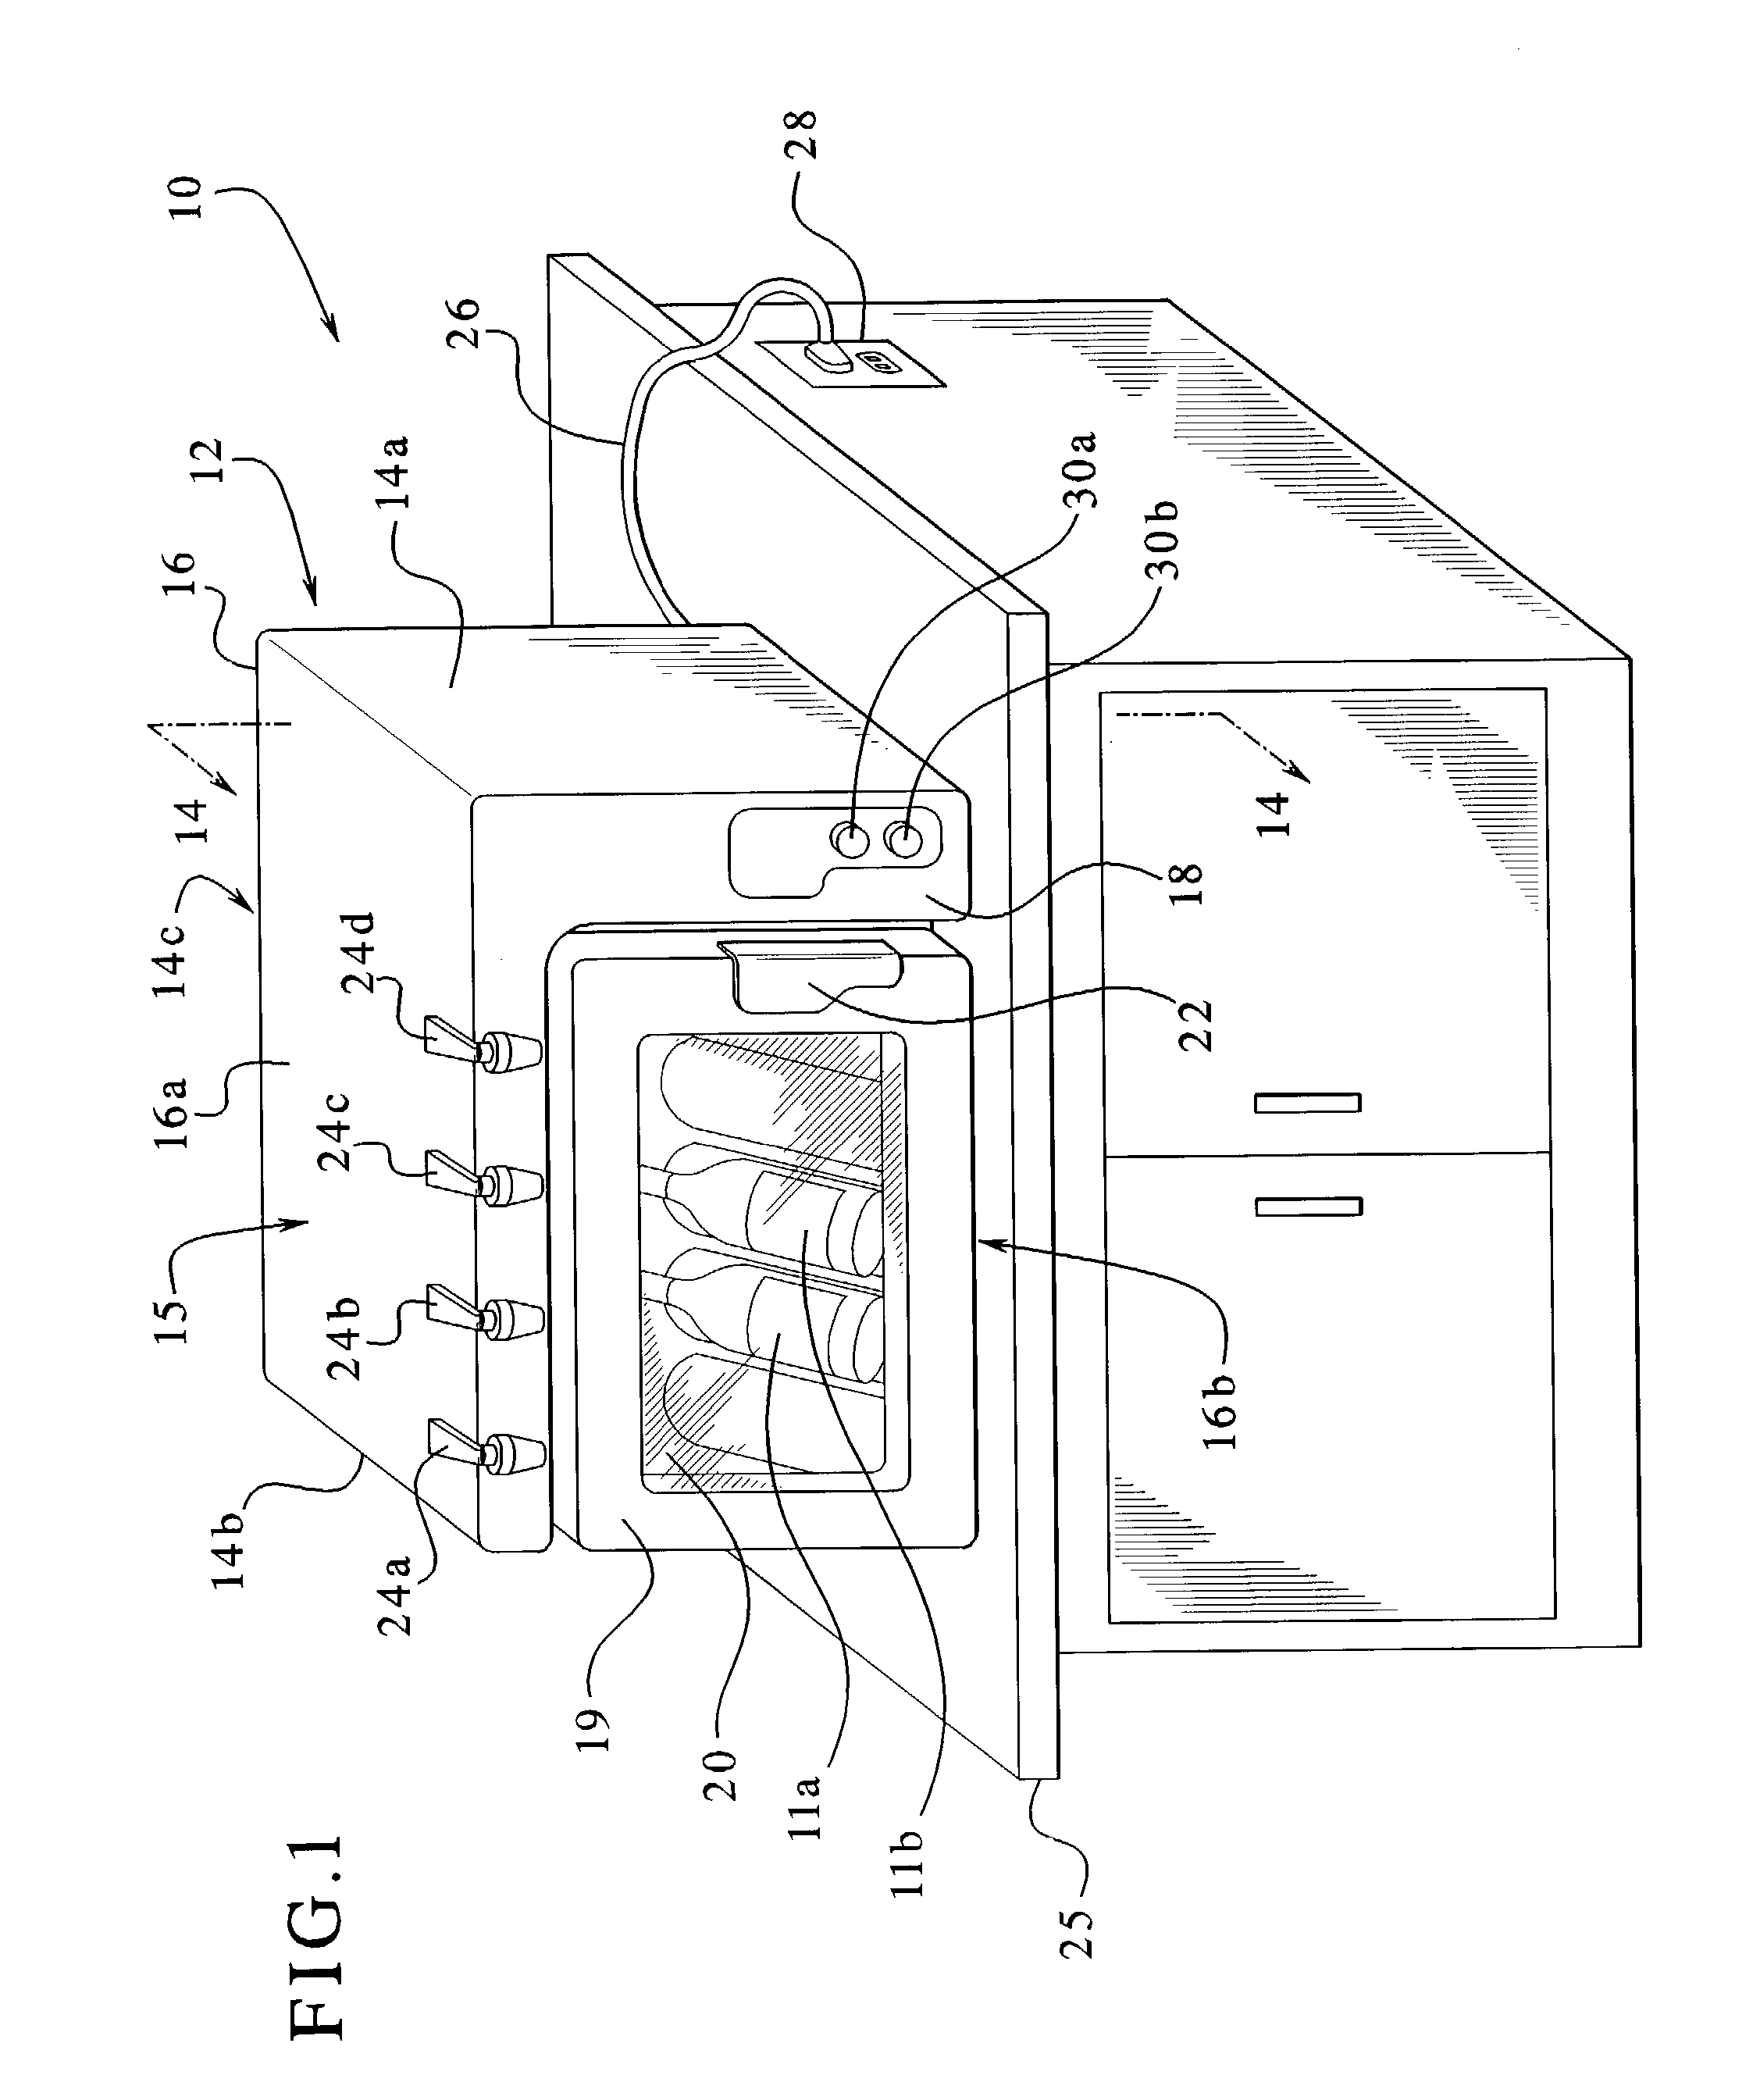 Apparatus and method for preserving collectible items